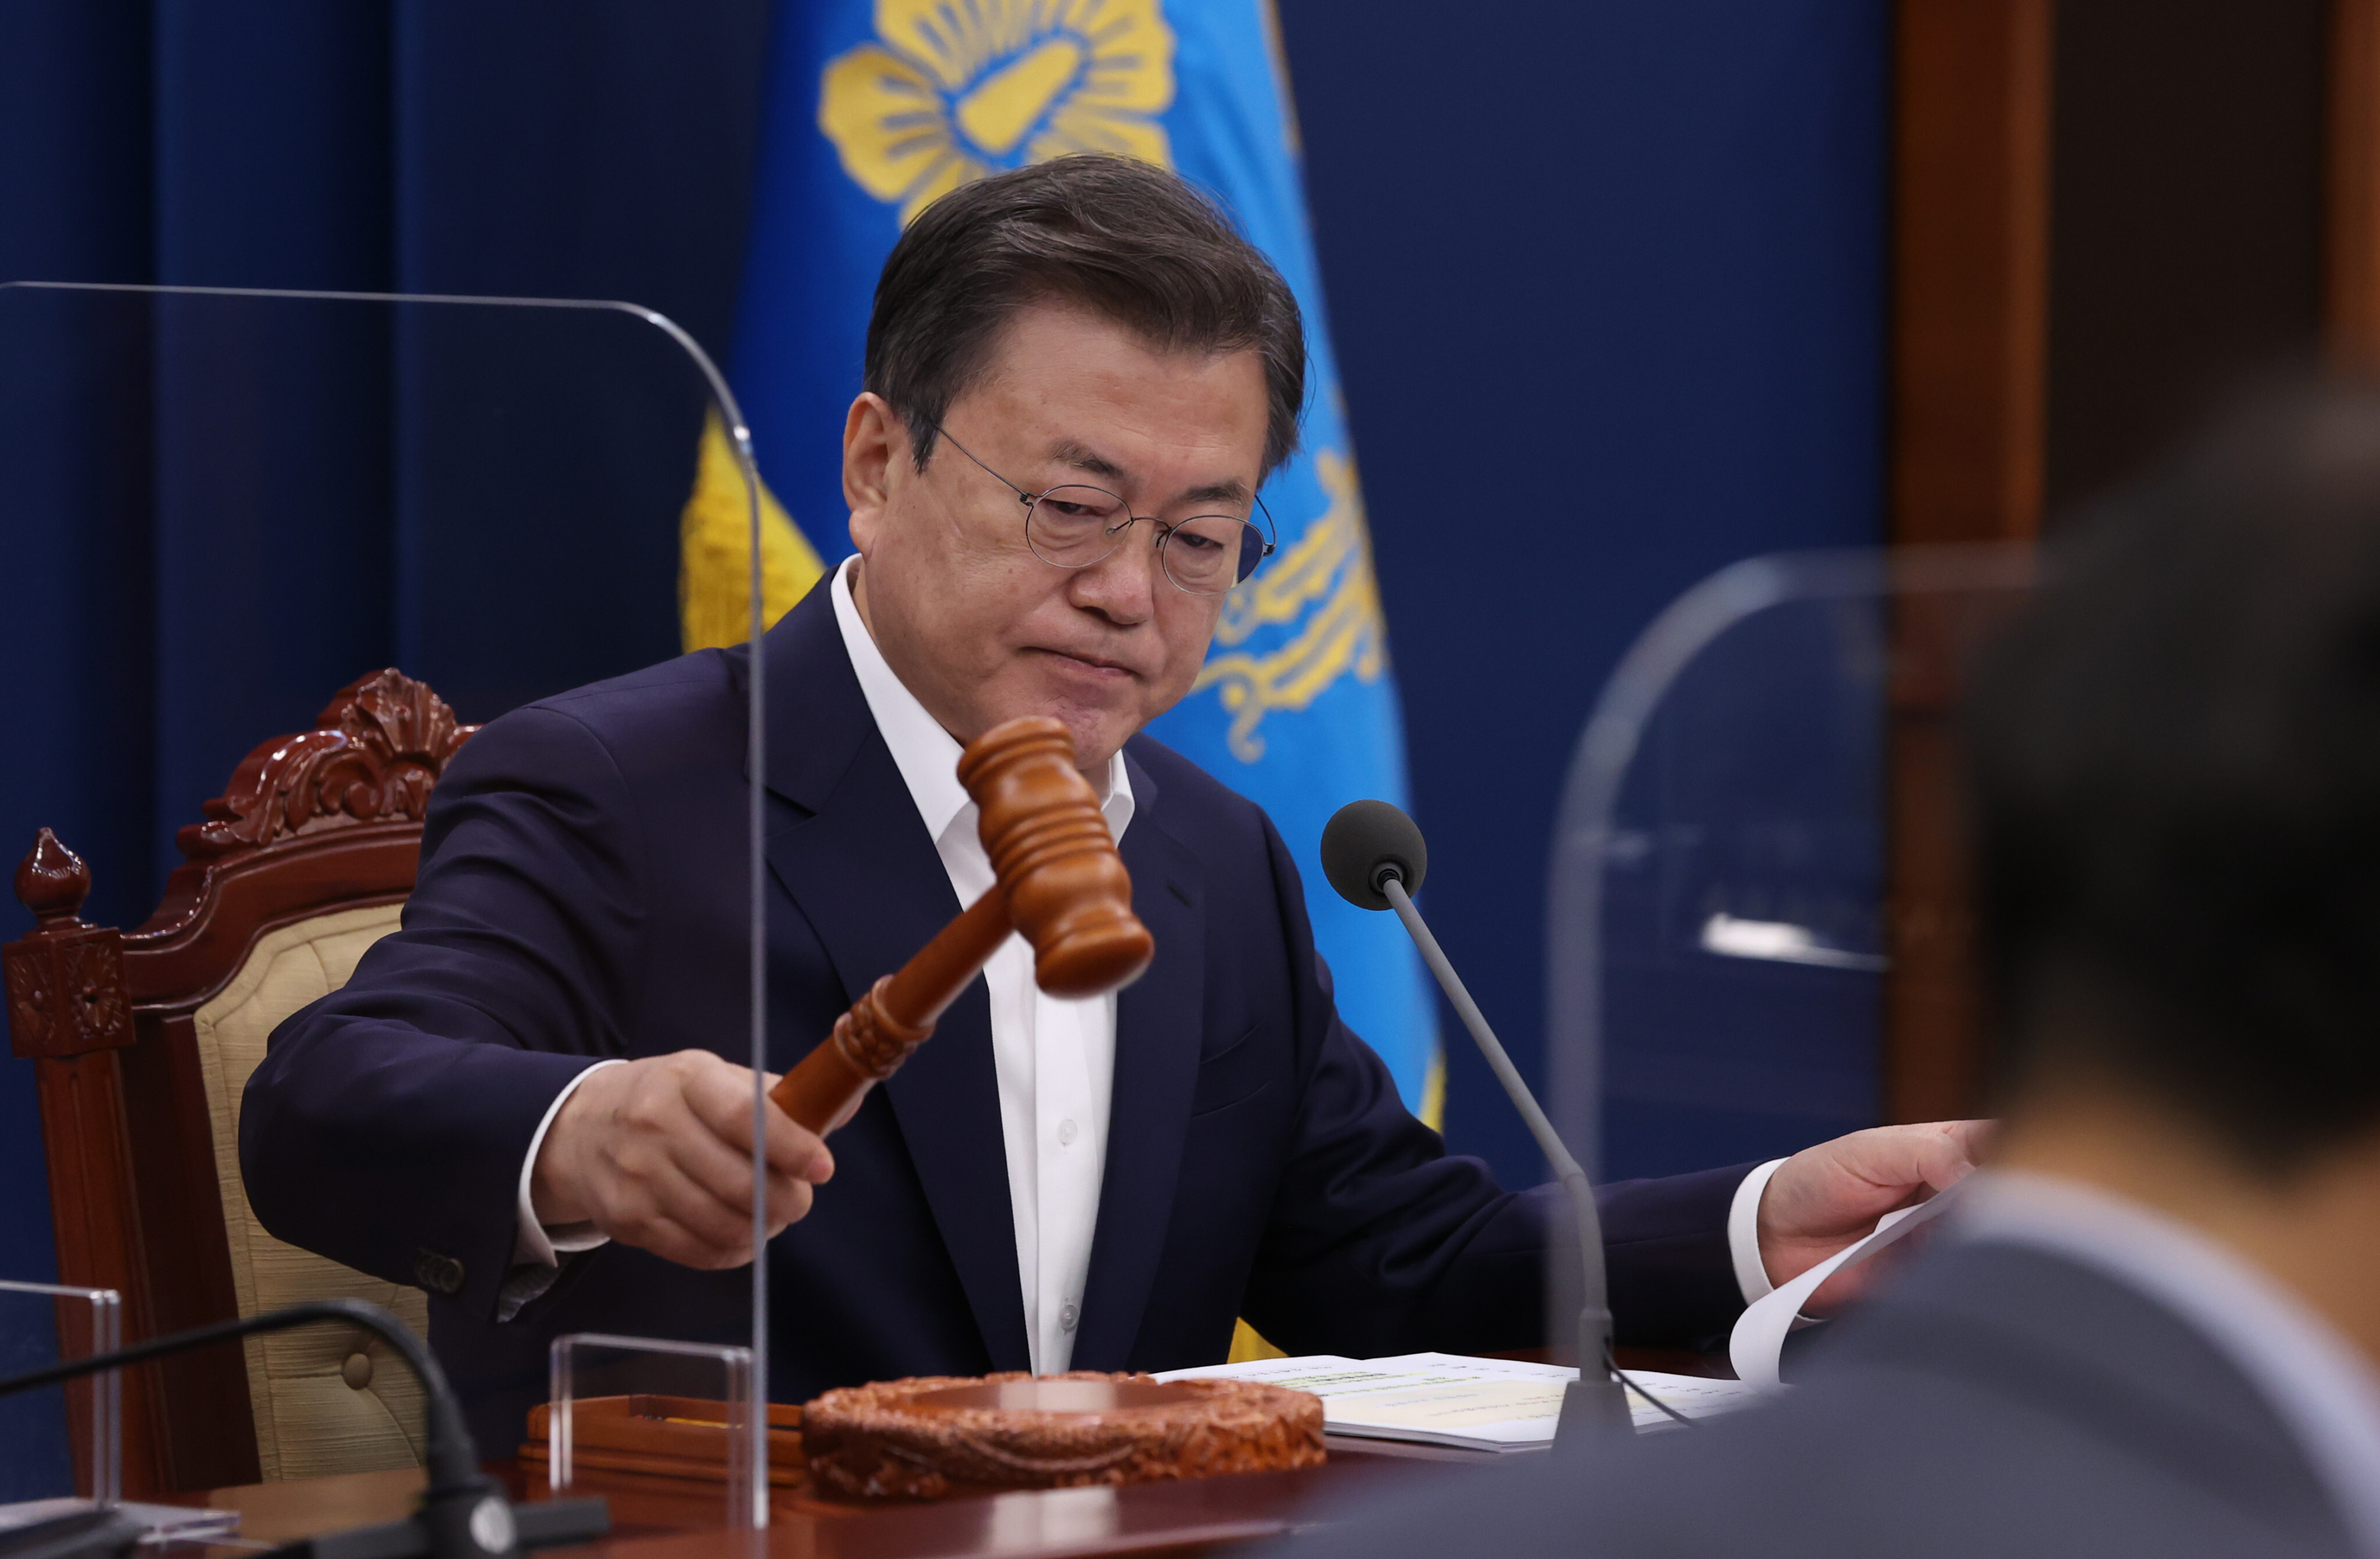 South Korean President Moon Jae-in opens a cabinet meeting at the presidential office in Seoul. Photo: Yonhap/DPA